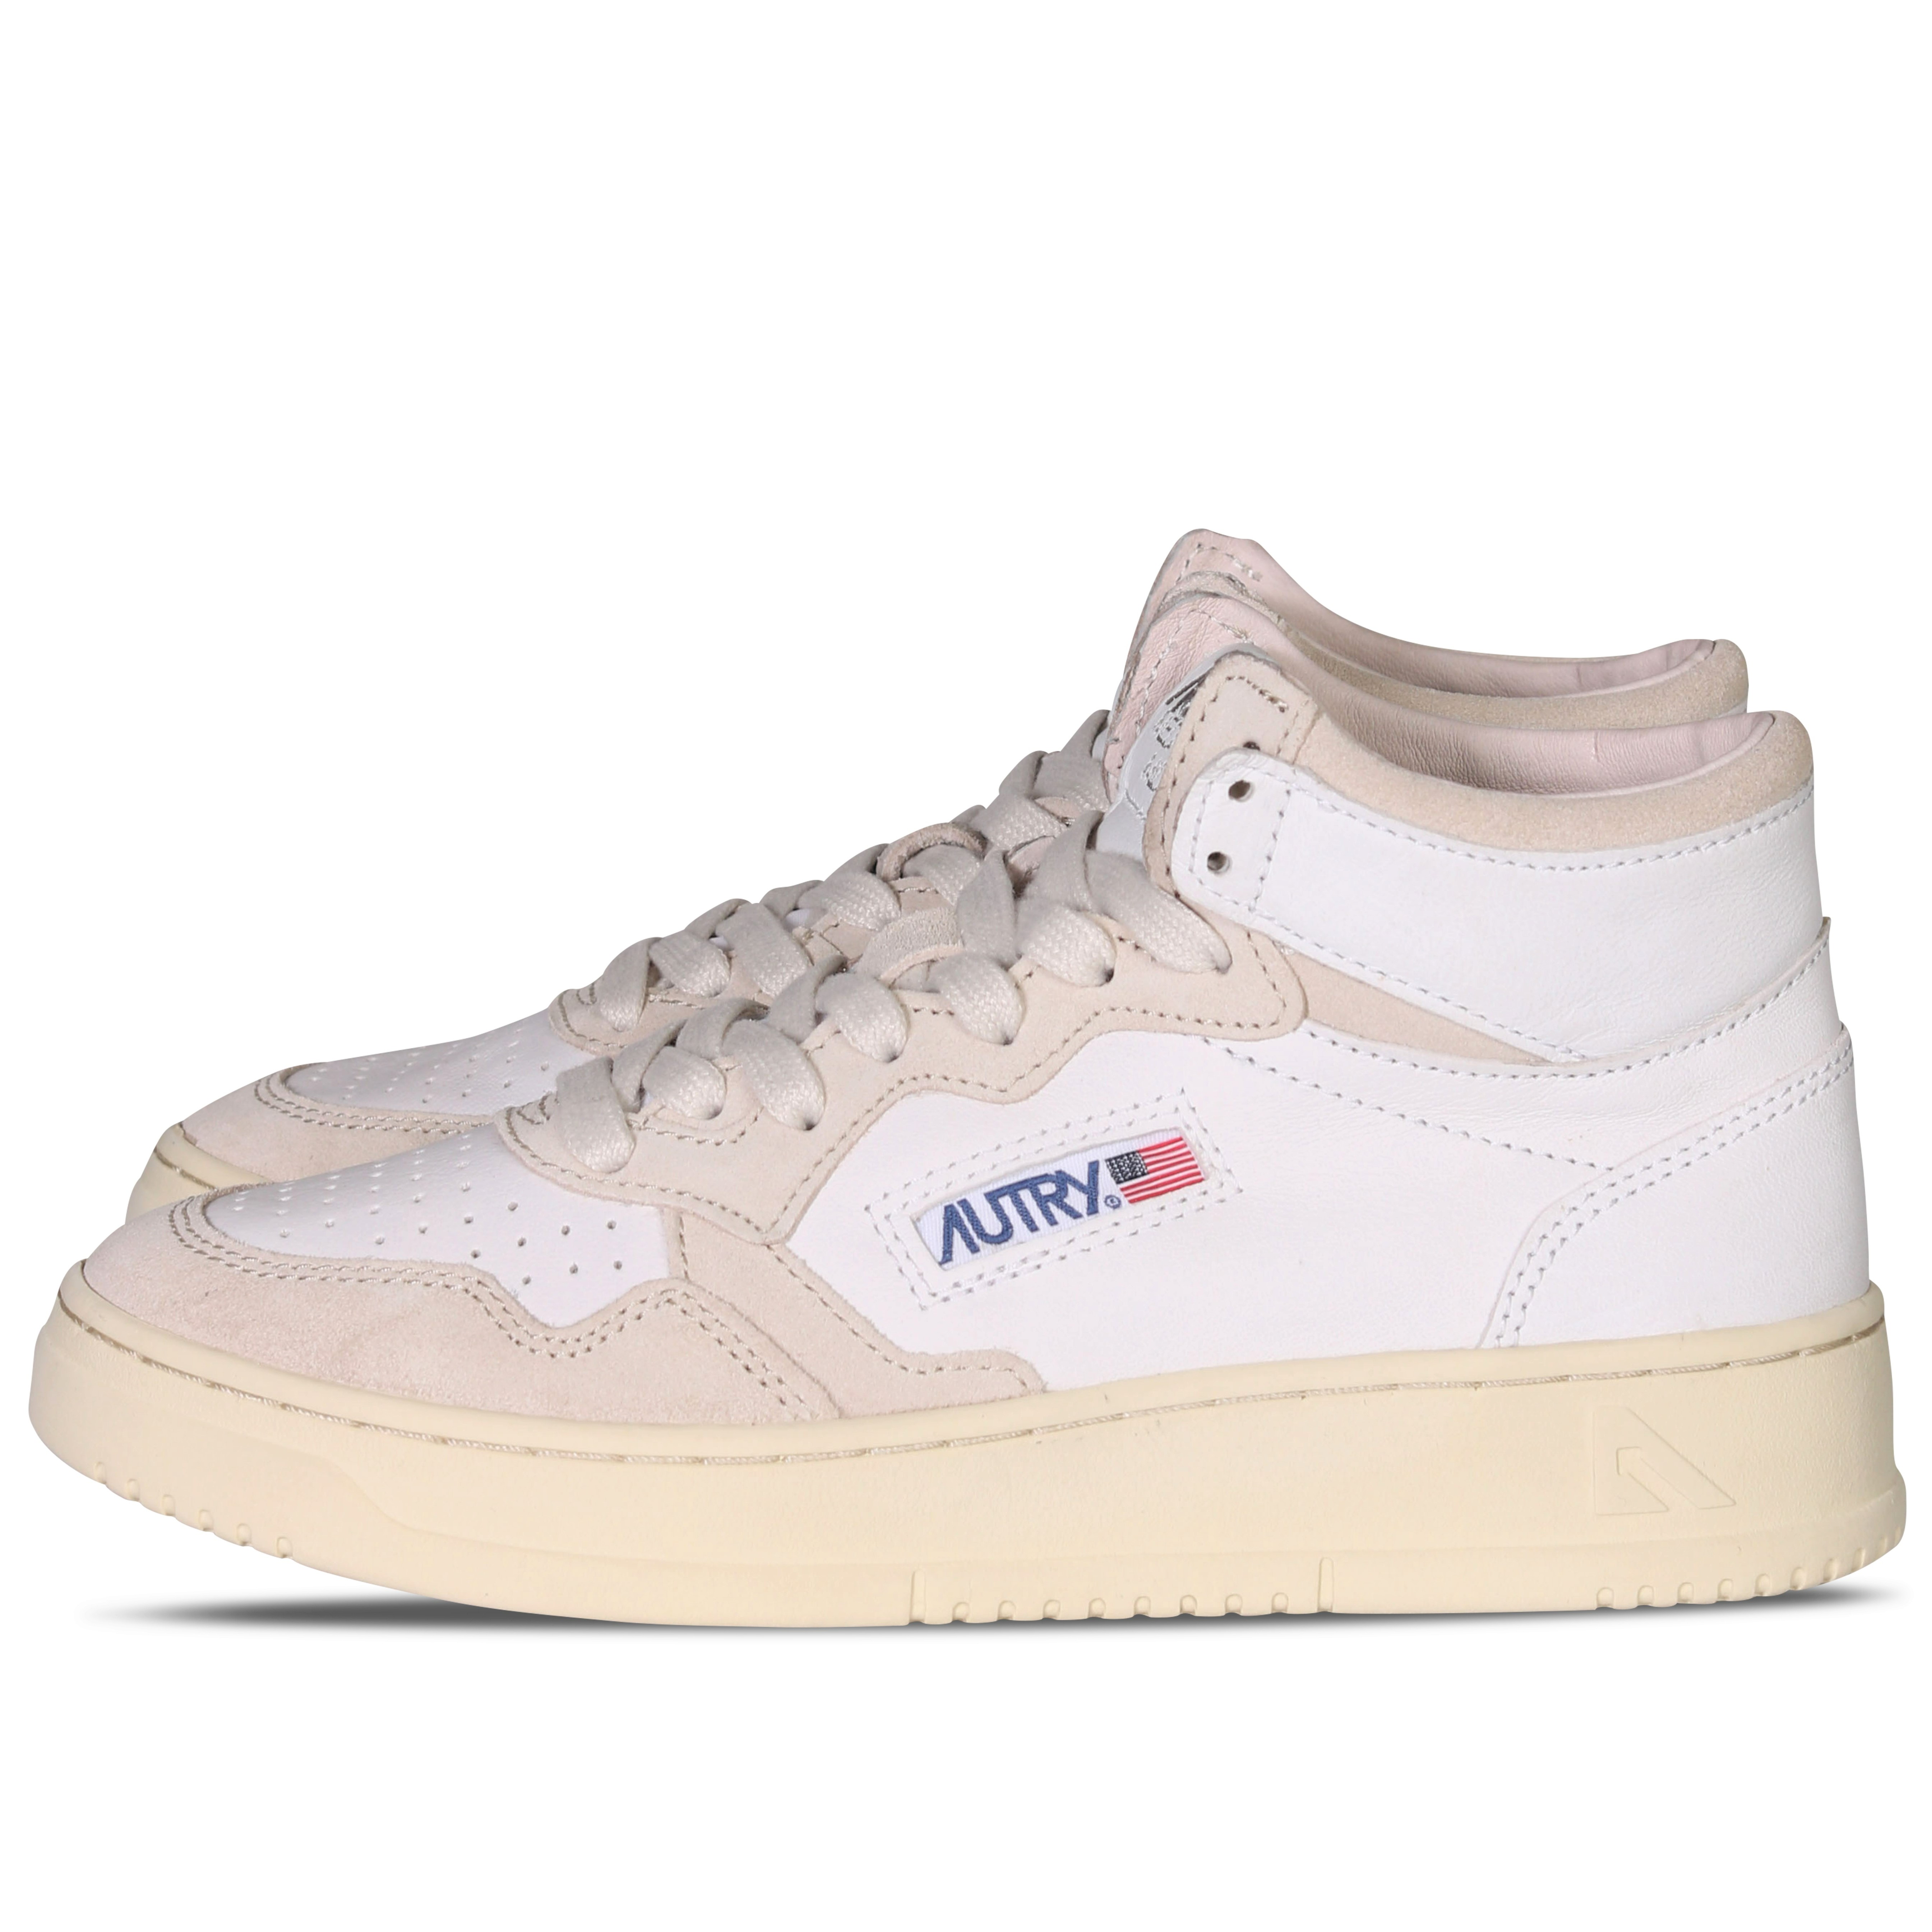 Autry Action Shoes Mid Sneaker Goat/Suede 35